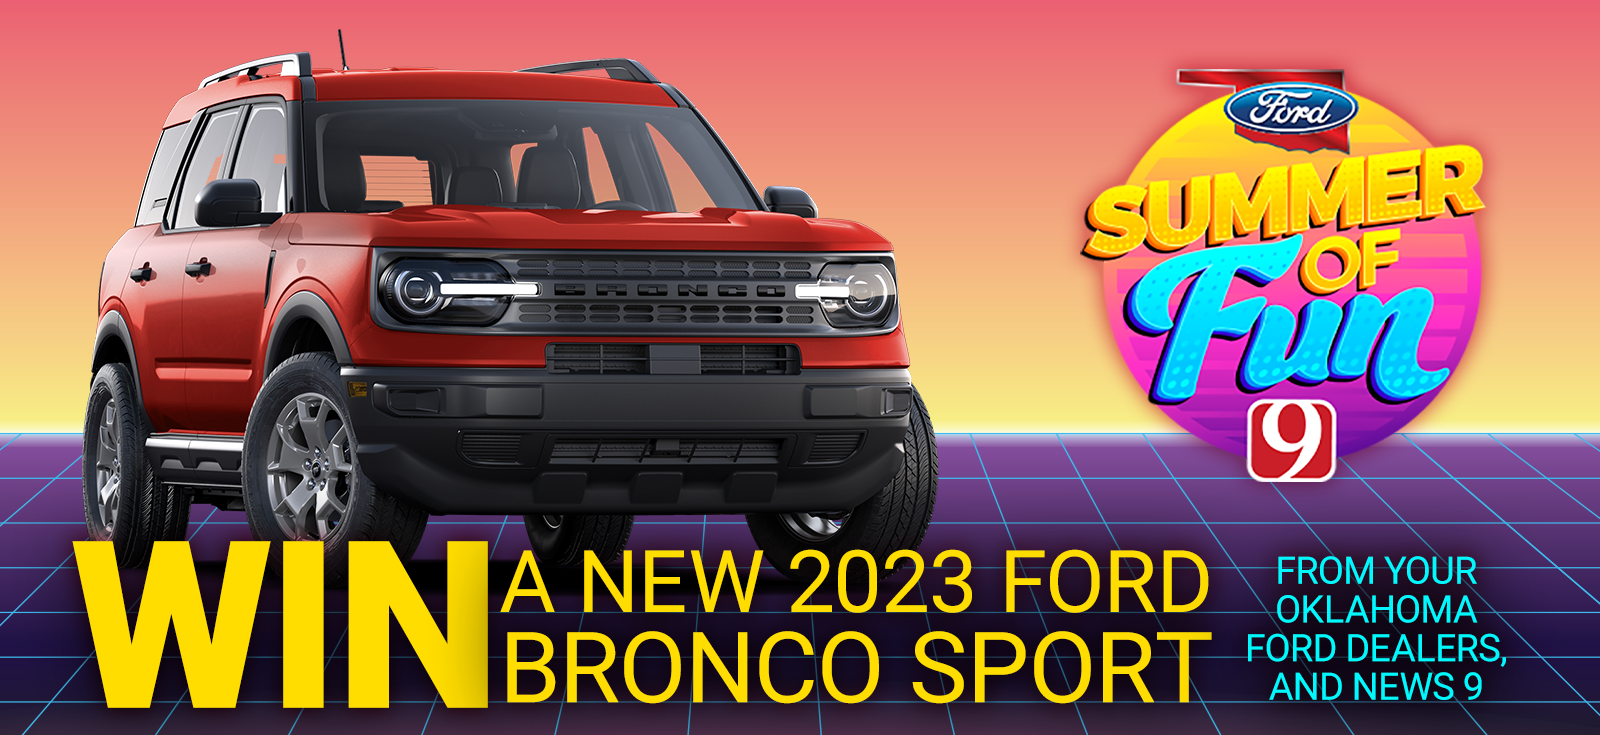 Win a Ford Bronco from News 9